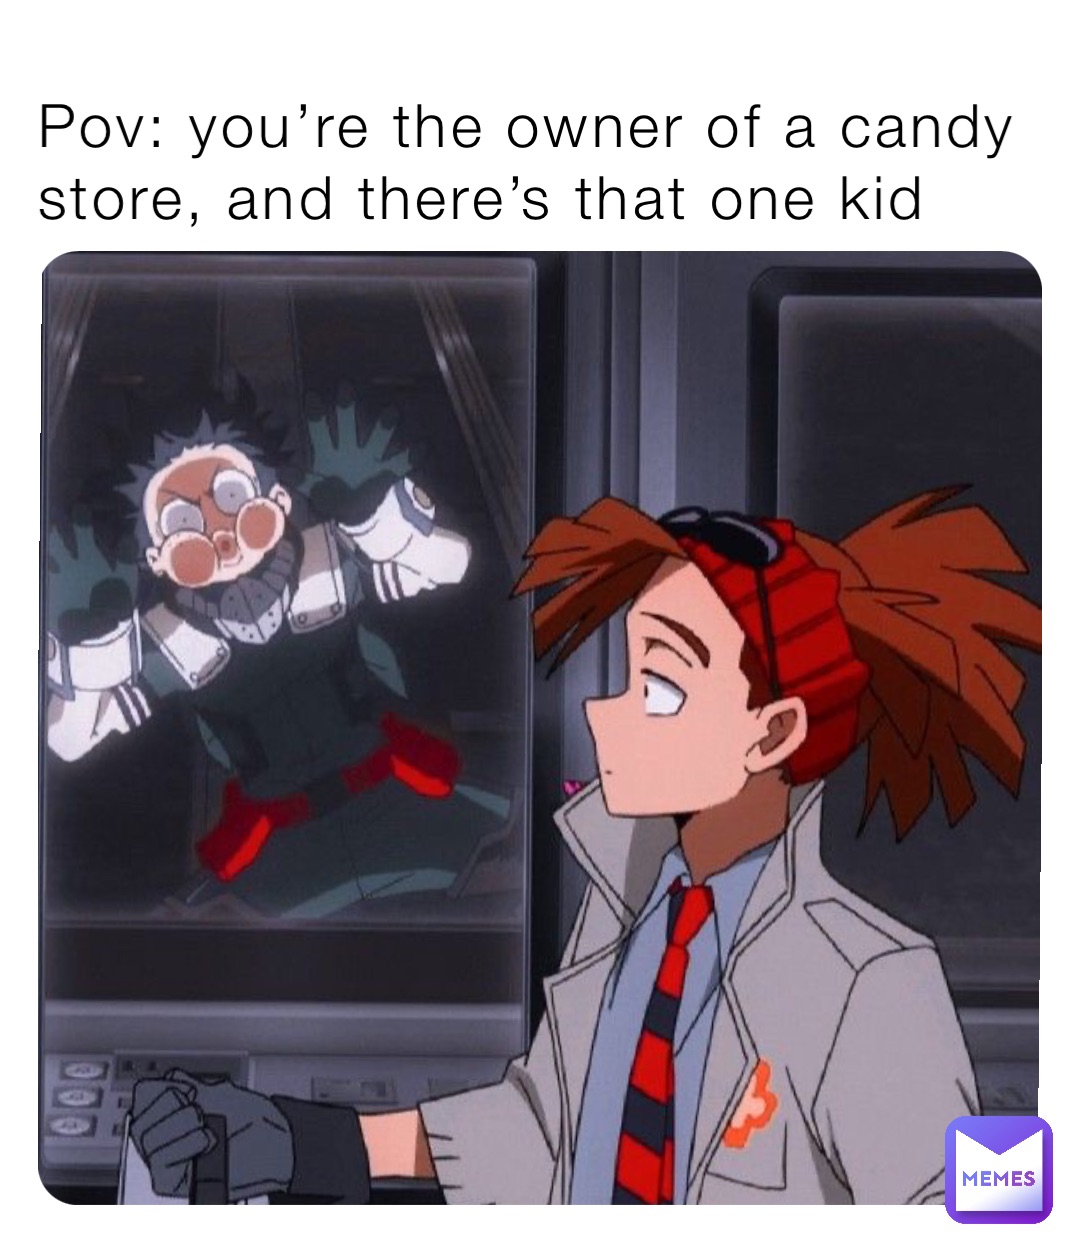 Pov: you’re the owner of a candy store, and there’s that one kid